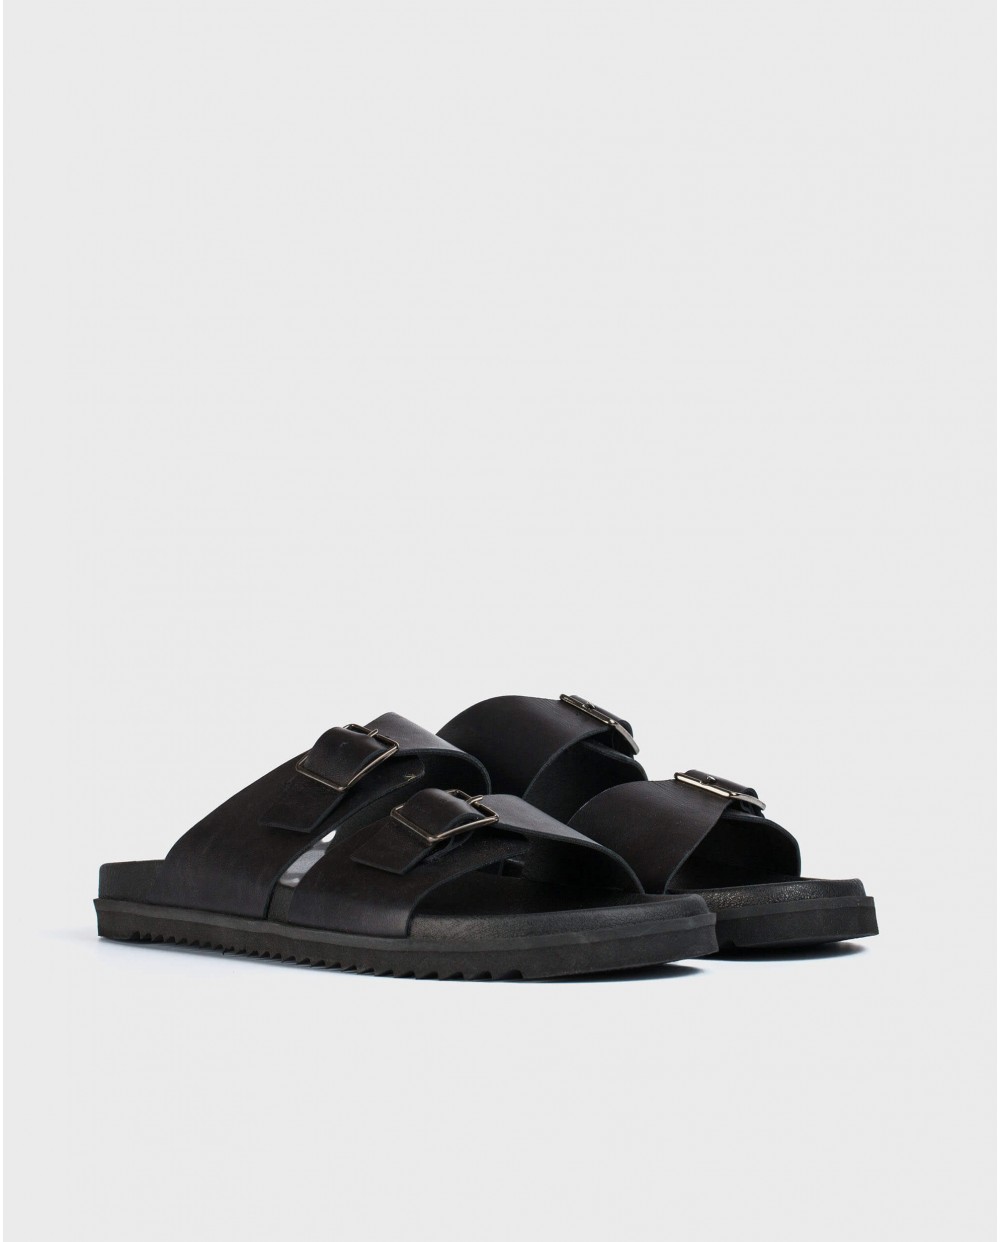 Wonders-Winter Outlet-Leather sandal with buckles